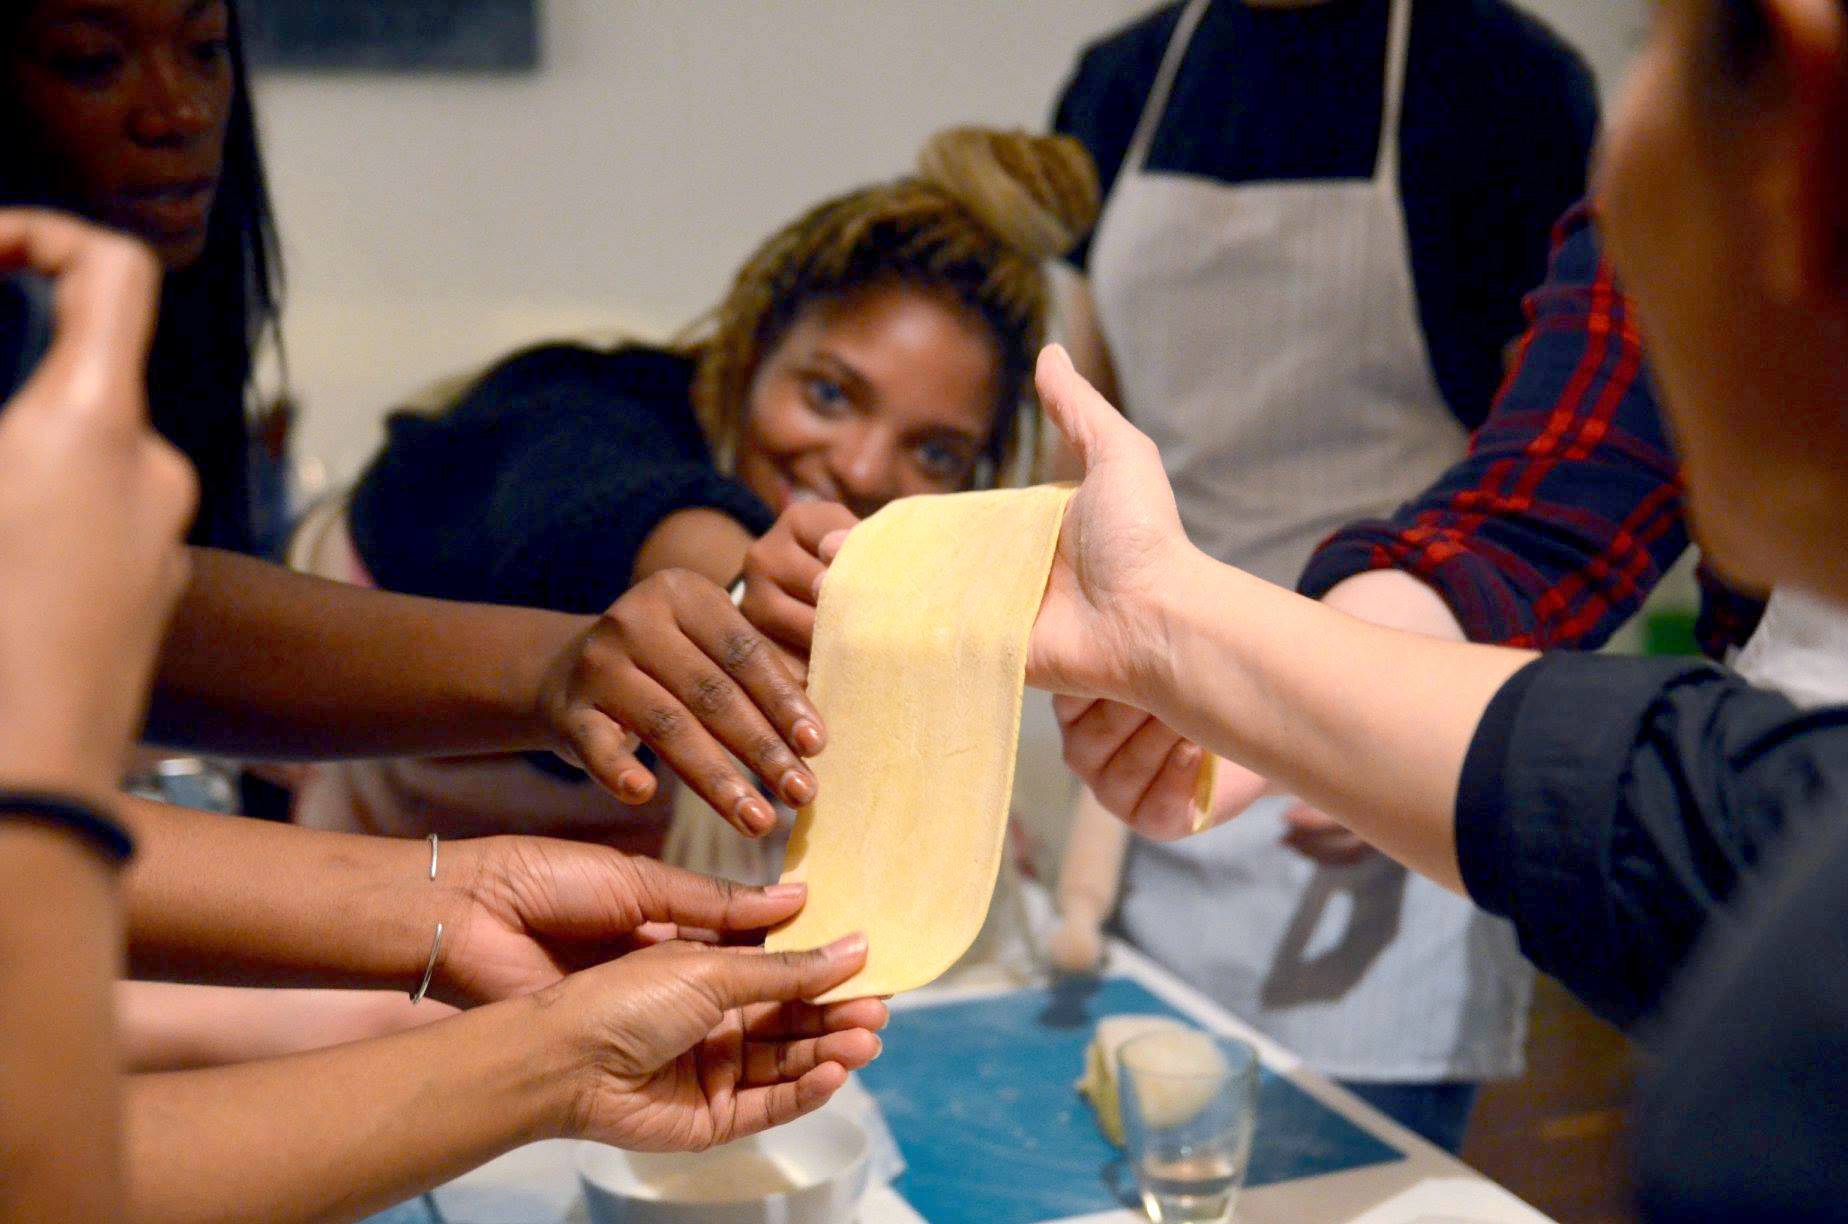 Learn to make homemade pasta and tiramisù at our Cooking Classes